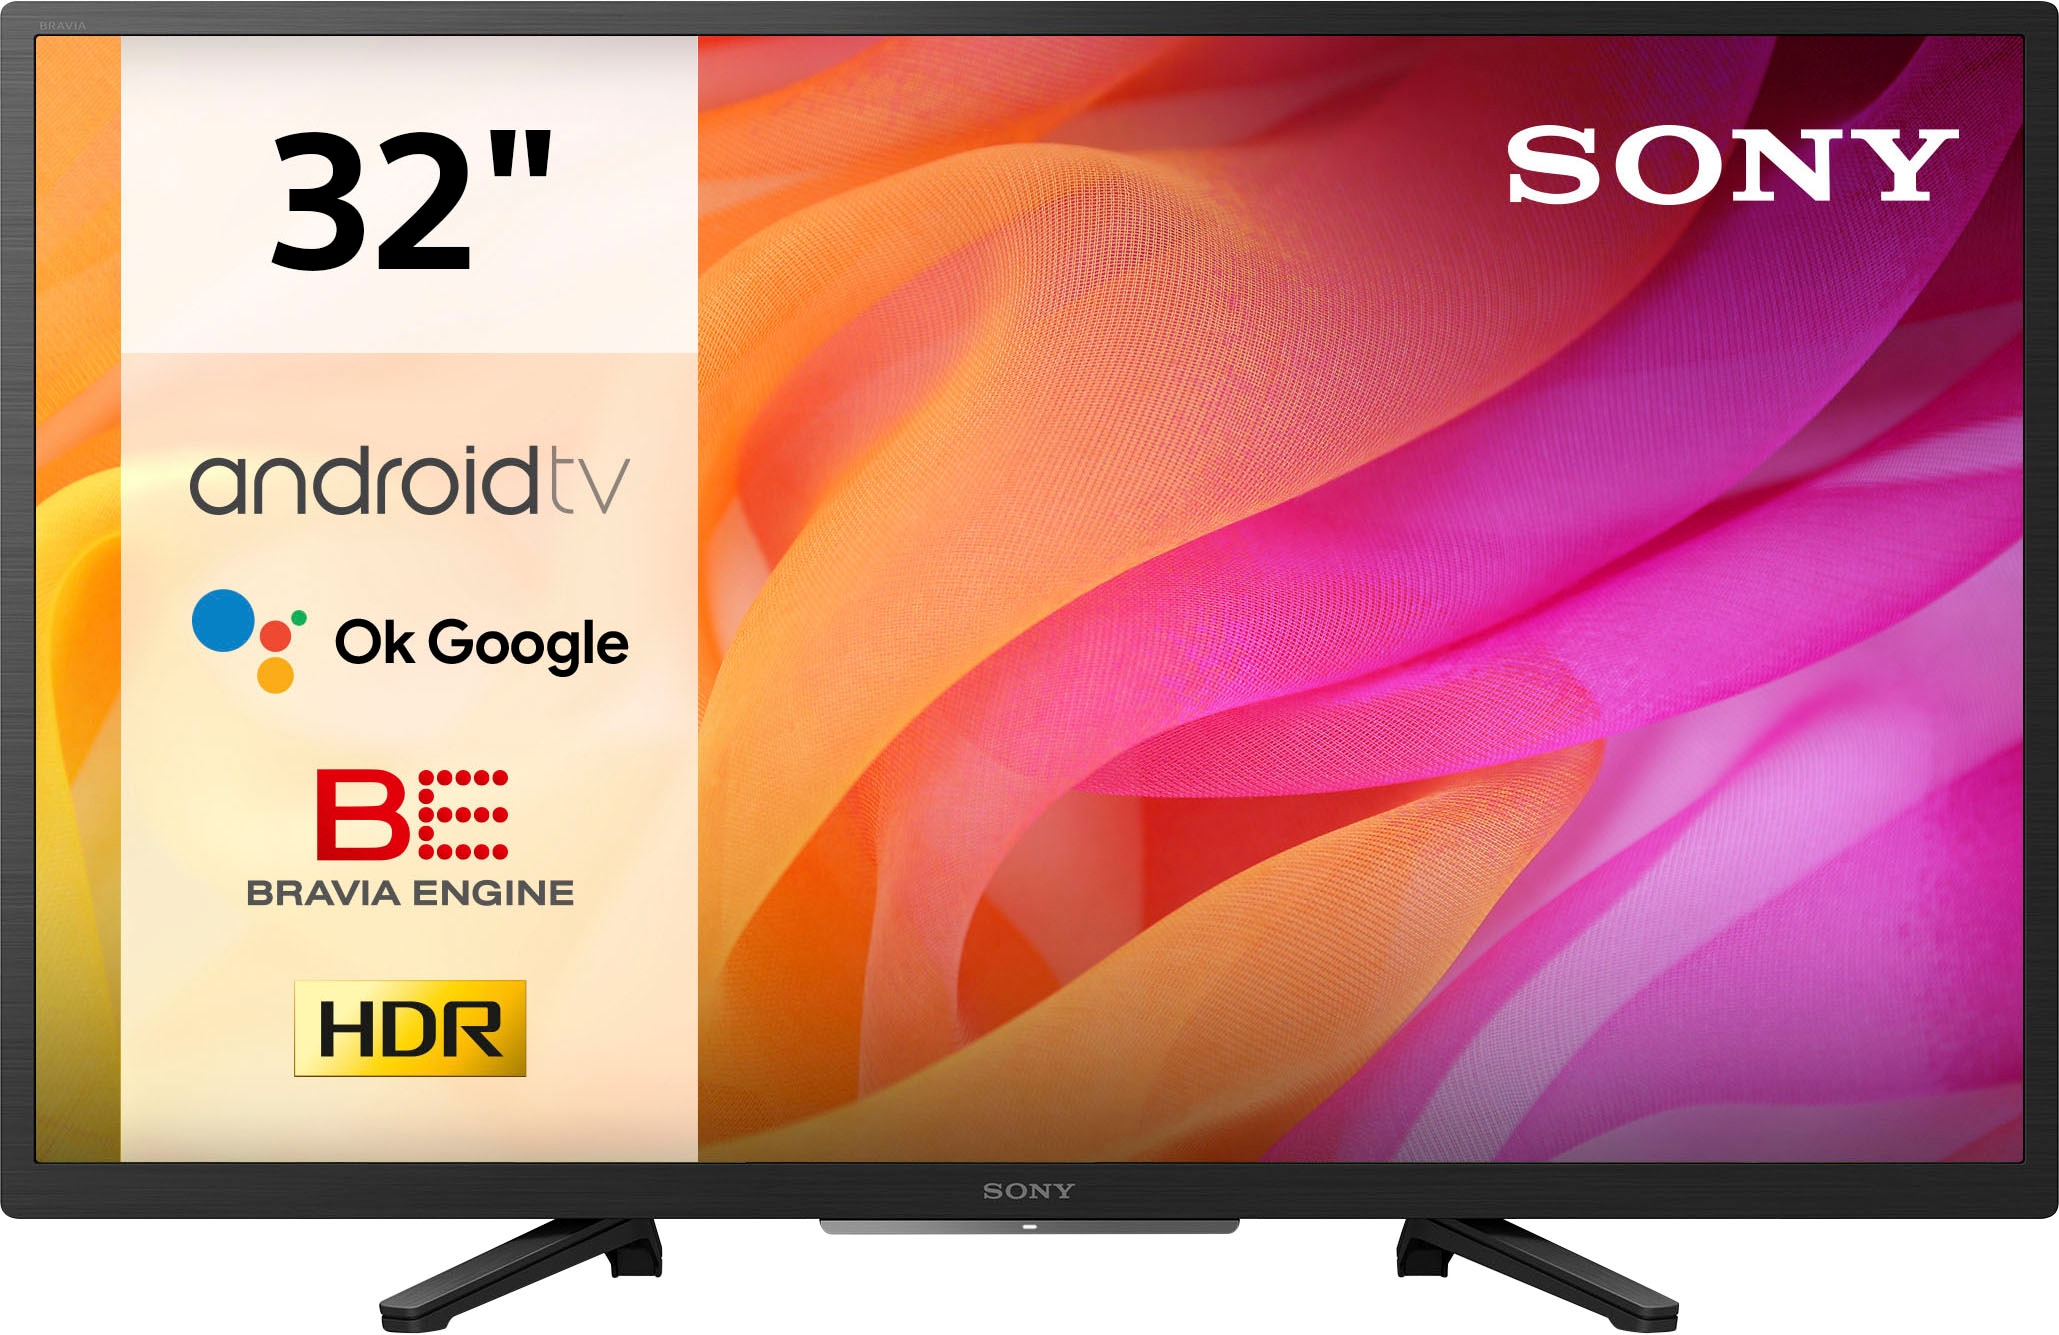 Sony LCD-LED Zoll, jetzt Smart Tuner, HD »KD-32800W/1«, 80 HDR TV, TV, WXGA, Triple bei Heady, OTTO BRAVIA, Android cm/32 Fernseher